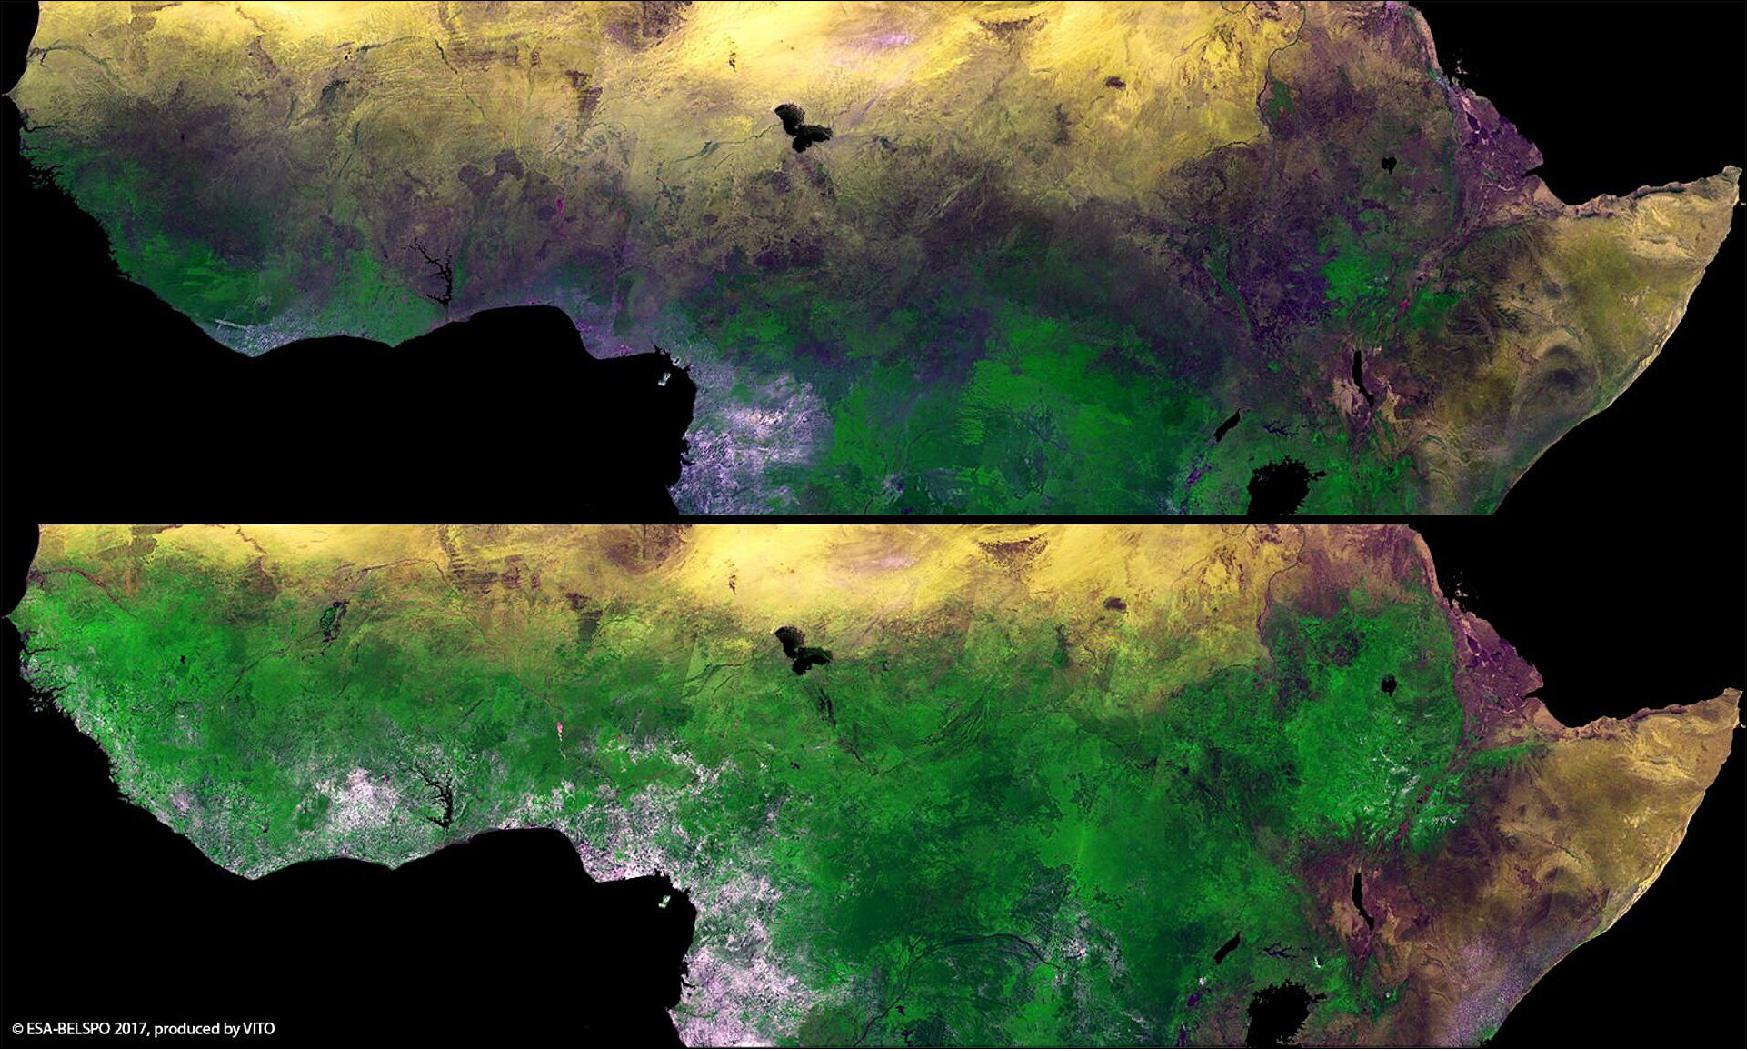 Figure 21: ESA's PROBA-V minisatellite reveals the seasonal changes in Africa's sub-Saharan Sahel, with the rainy season allowing vegetation to blossom between February (top) and September (bottom). The semi-arid Sahel stretches more than 5000 km across Africa, from the Atlantic Ocean (Senegal, Mauritania) to the Red Sea (Sudan). The few months of the rainy season in the Sahel are much needed in these hot and sunny parts of Africa, and are critical for the food security and livelihood of their inhabitants. The name Sahel can be translated from Arabic as coast or shore, considered as the ever-shifting landward ‘coastline' of the arid Sahara Desert (image credit: ESA/Belspo – produced by VITO)